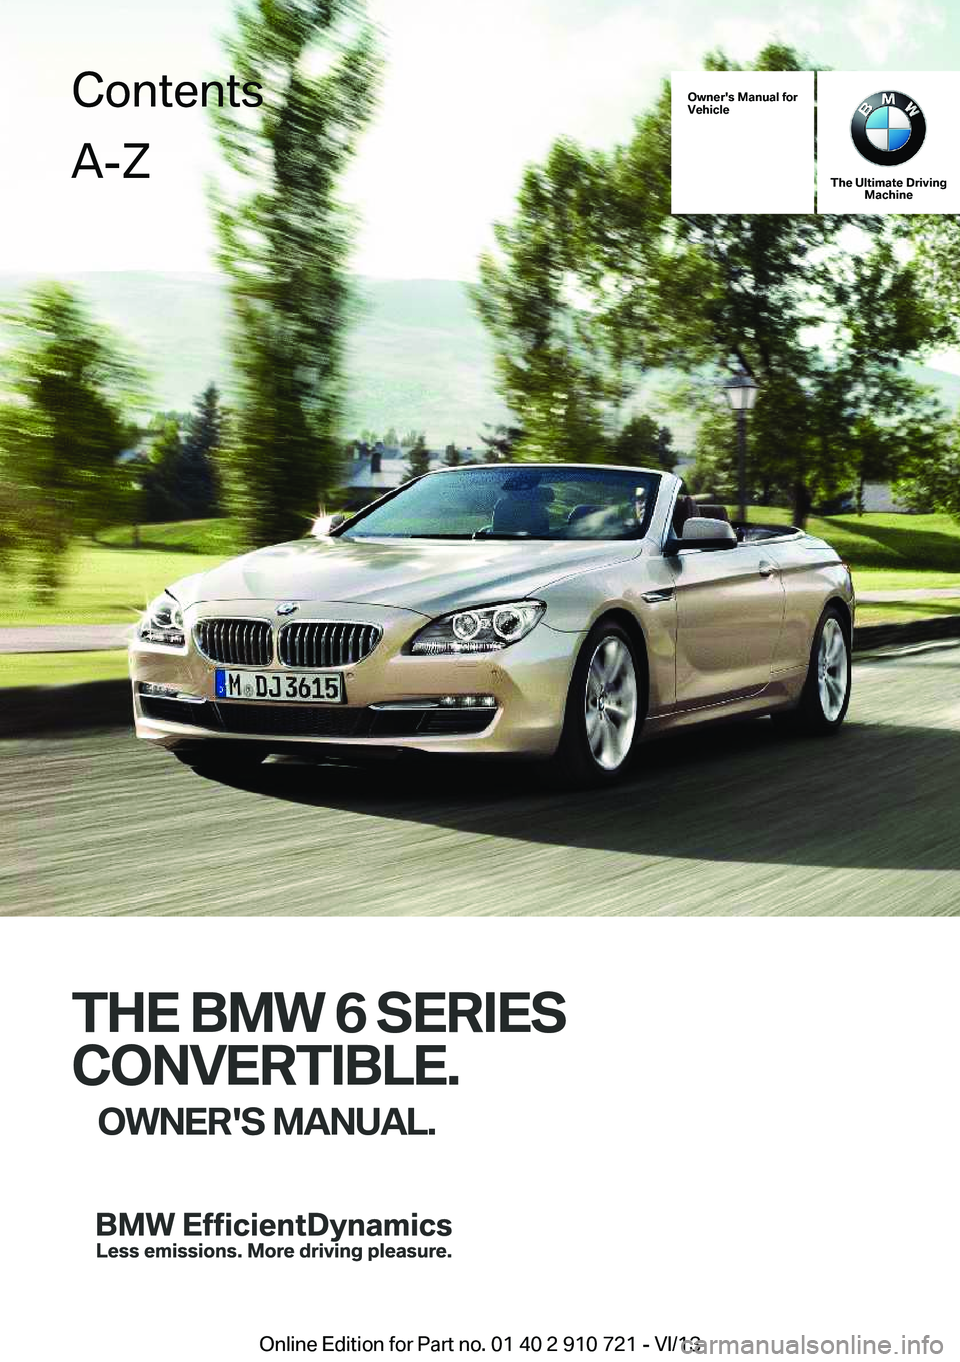 BMW 650I CONVERTIBLE 2014  Owners Manual Owner's Manual forVehicle
The Ultimate DrivingMachine
THE BMW 6 SERIES
CONVERTIBLE.
OWNER'S MANUAL.
ContentsA-Z
Online Edition for Part no. 01 40 2 910 721 - VI/13   